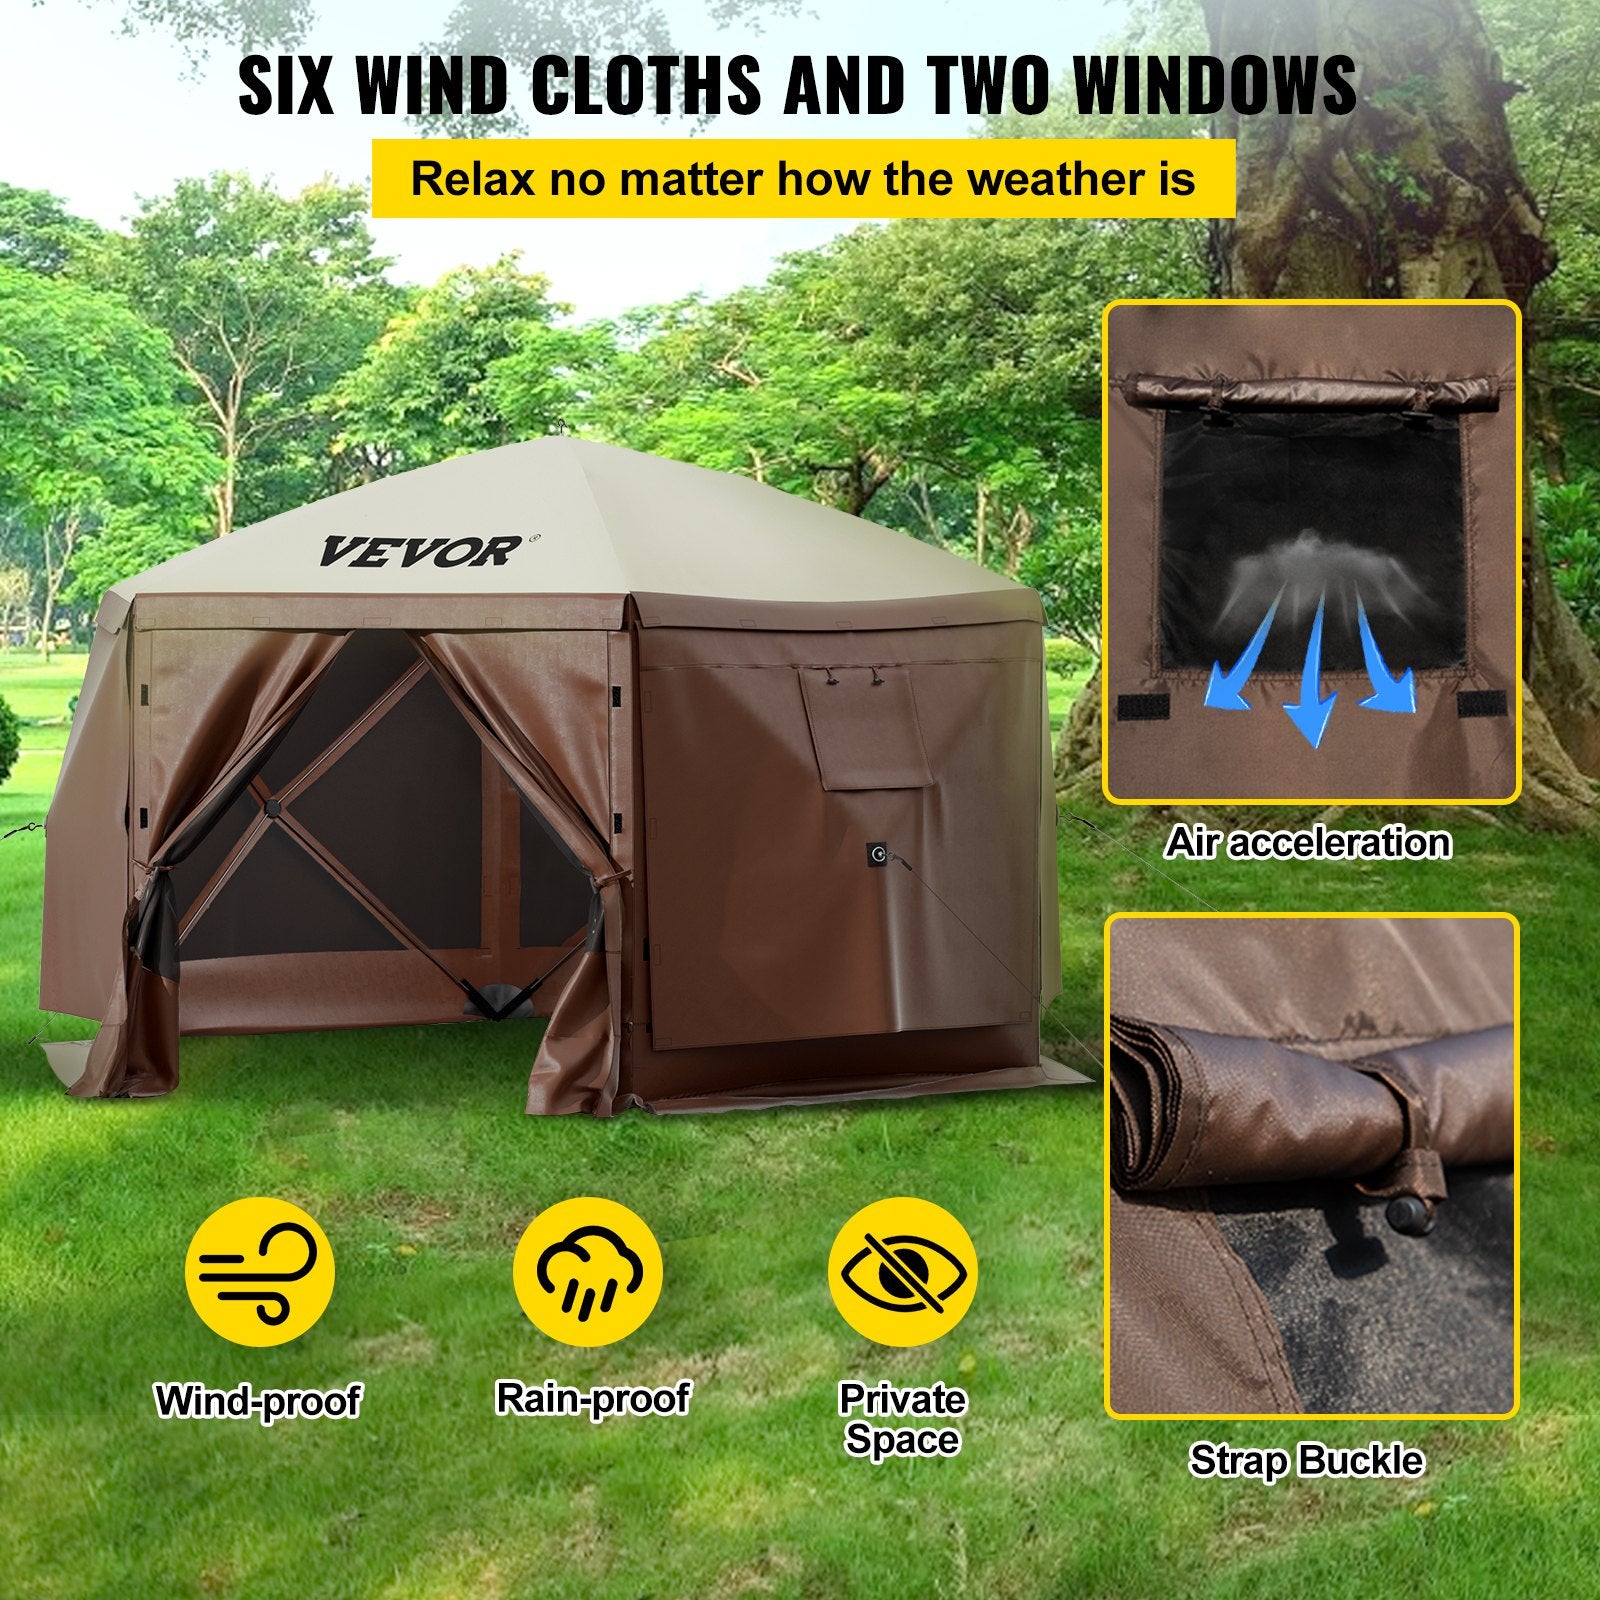 VEVOR Camping Gazebo Screen Tent, 12 x 12ft, 6 Sided Pop-up Canopy Shelter Tent with Mesh Windows, Portable Carry Bag, Stakes, Large Shade Tents for Outdoor Camping, Lawn and Backyard, Brown/Beige